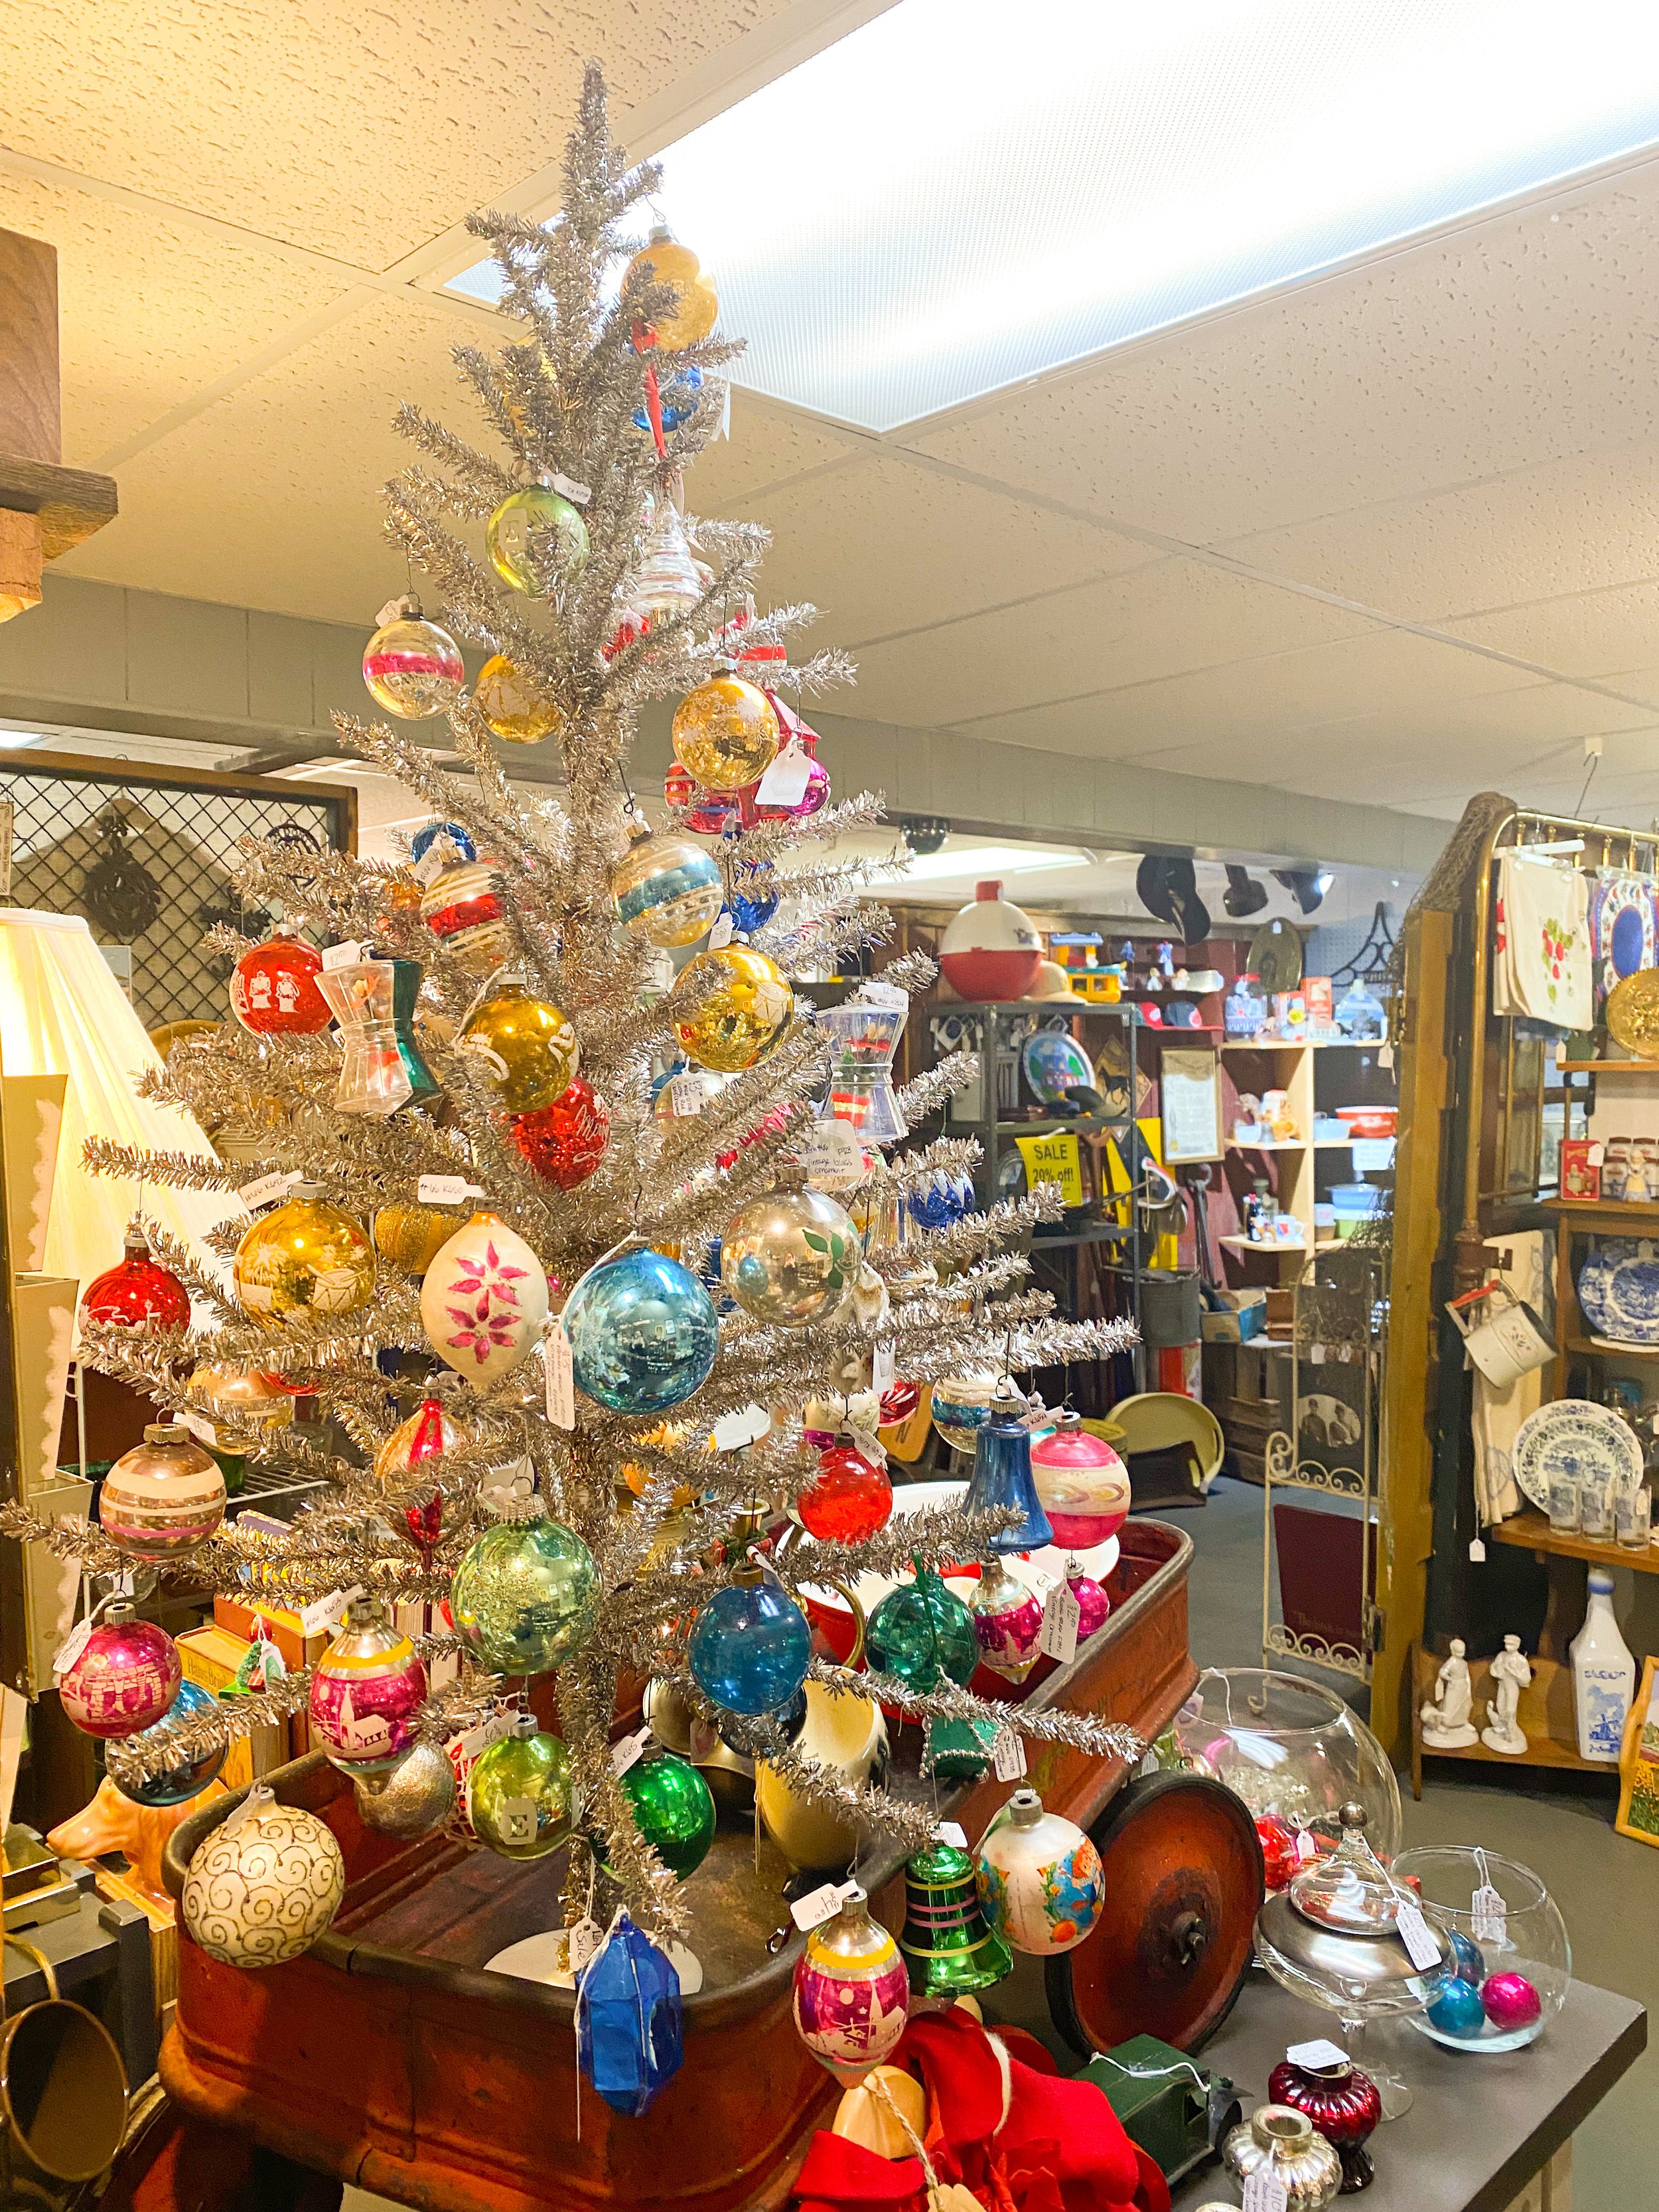 Valuable Vintage Christmas Ornaments and Collectibles to Look for in Antique  Shops and Attics